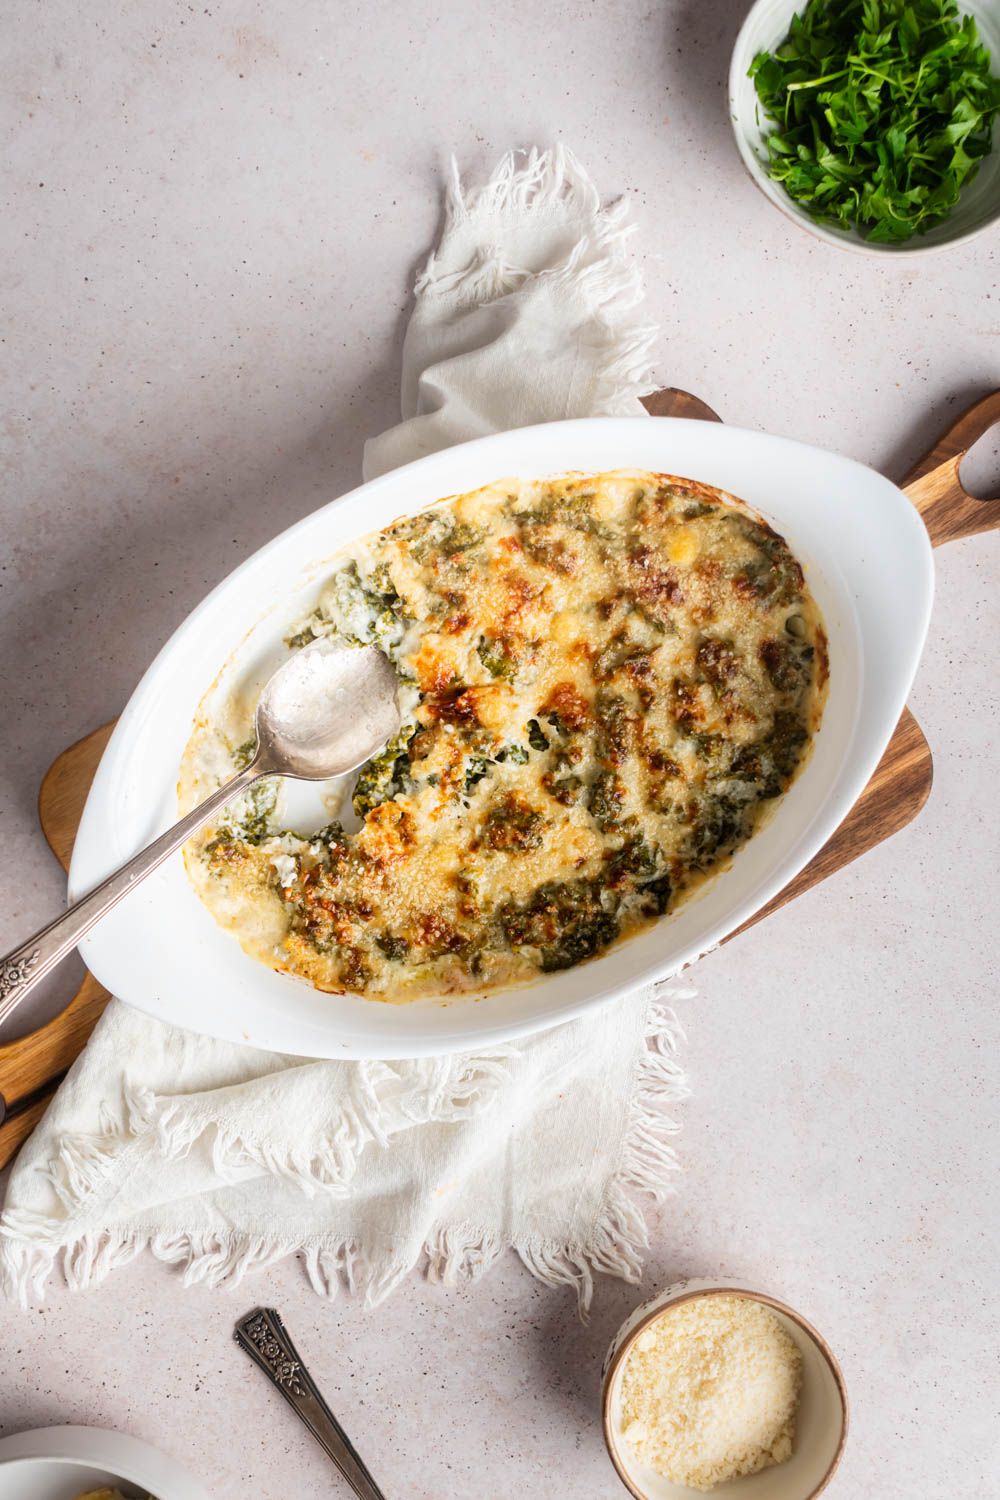 Kale cooked in cream sauce with crispy Parmesan cheese in a baking dish with two spoons.